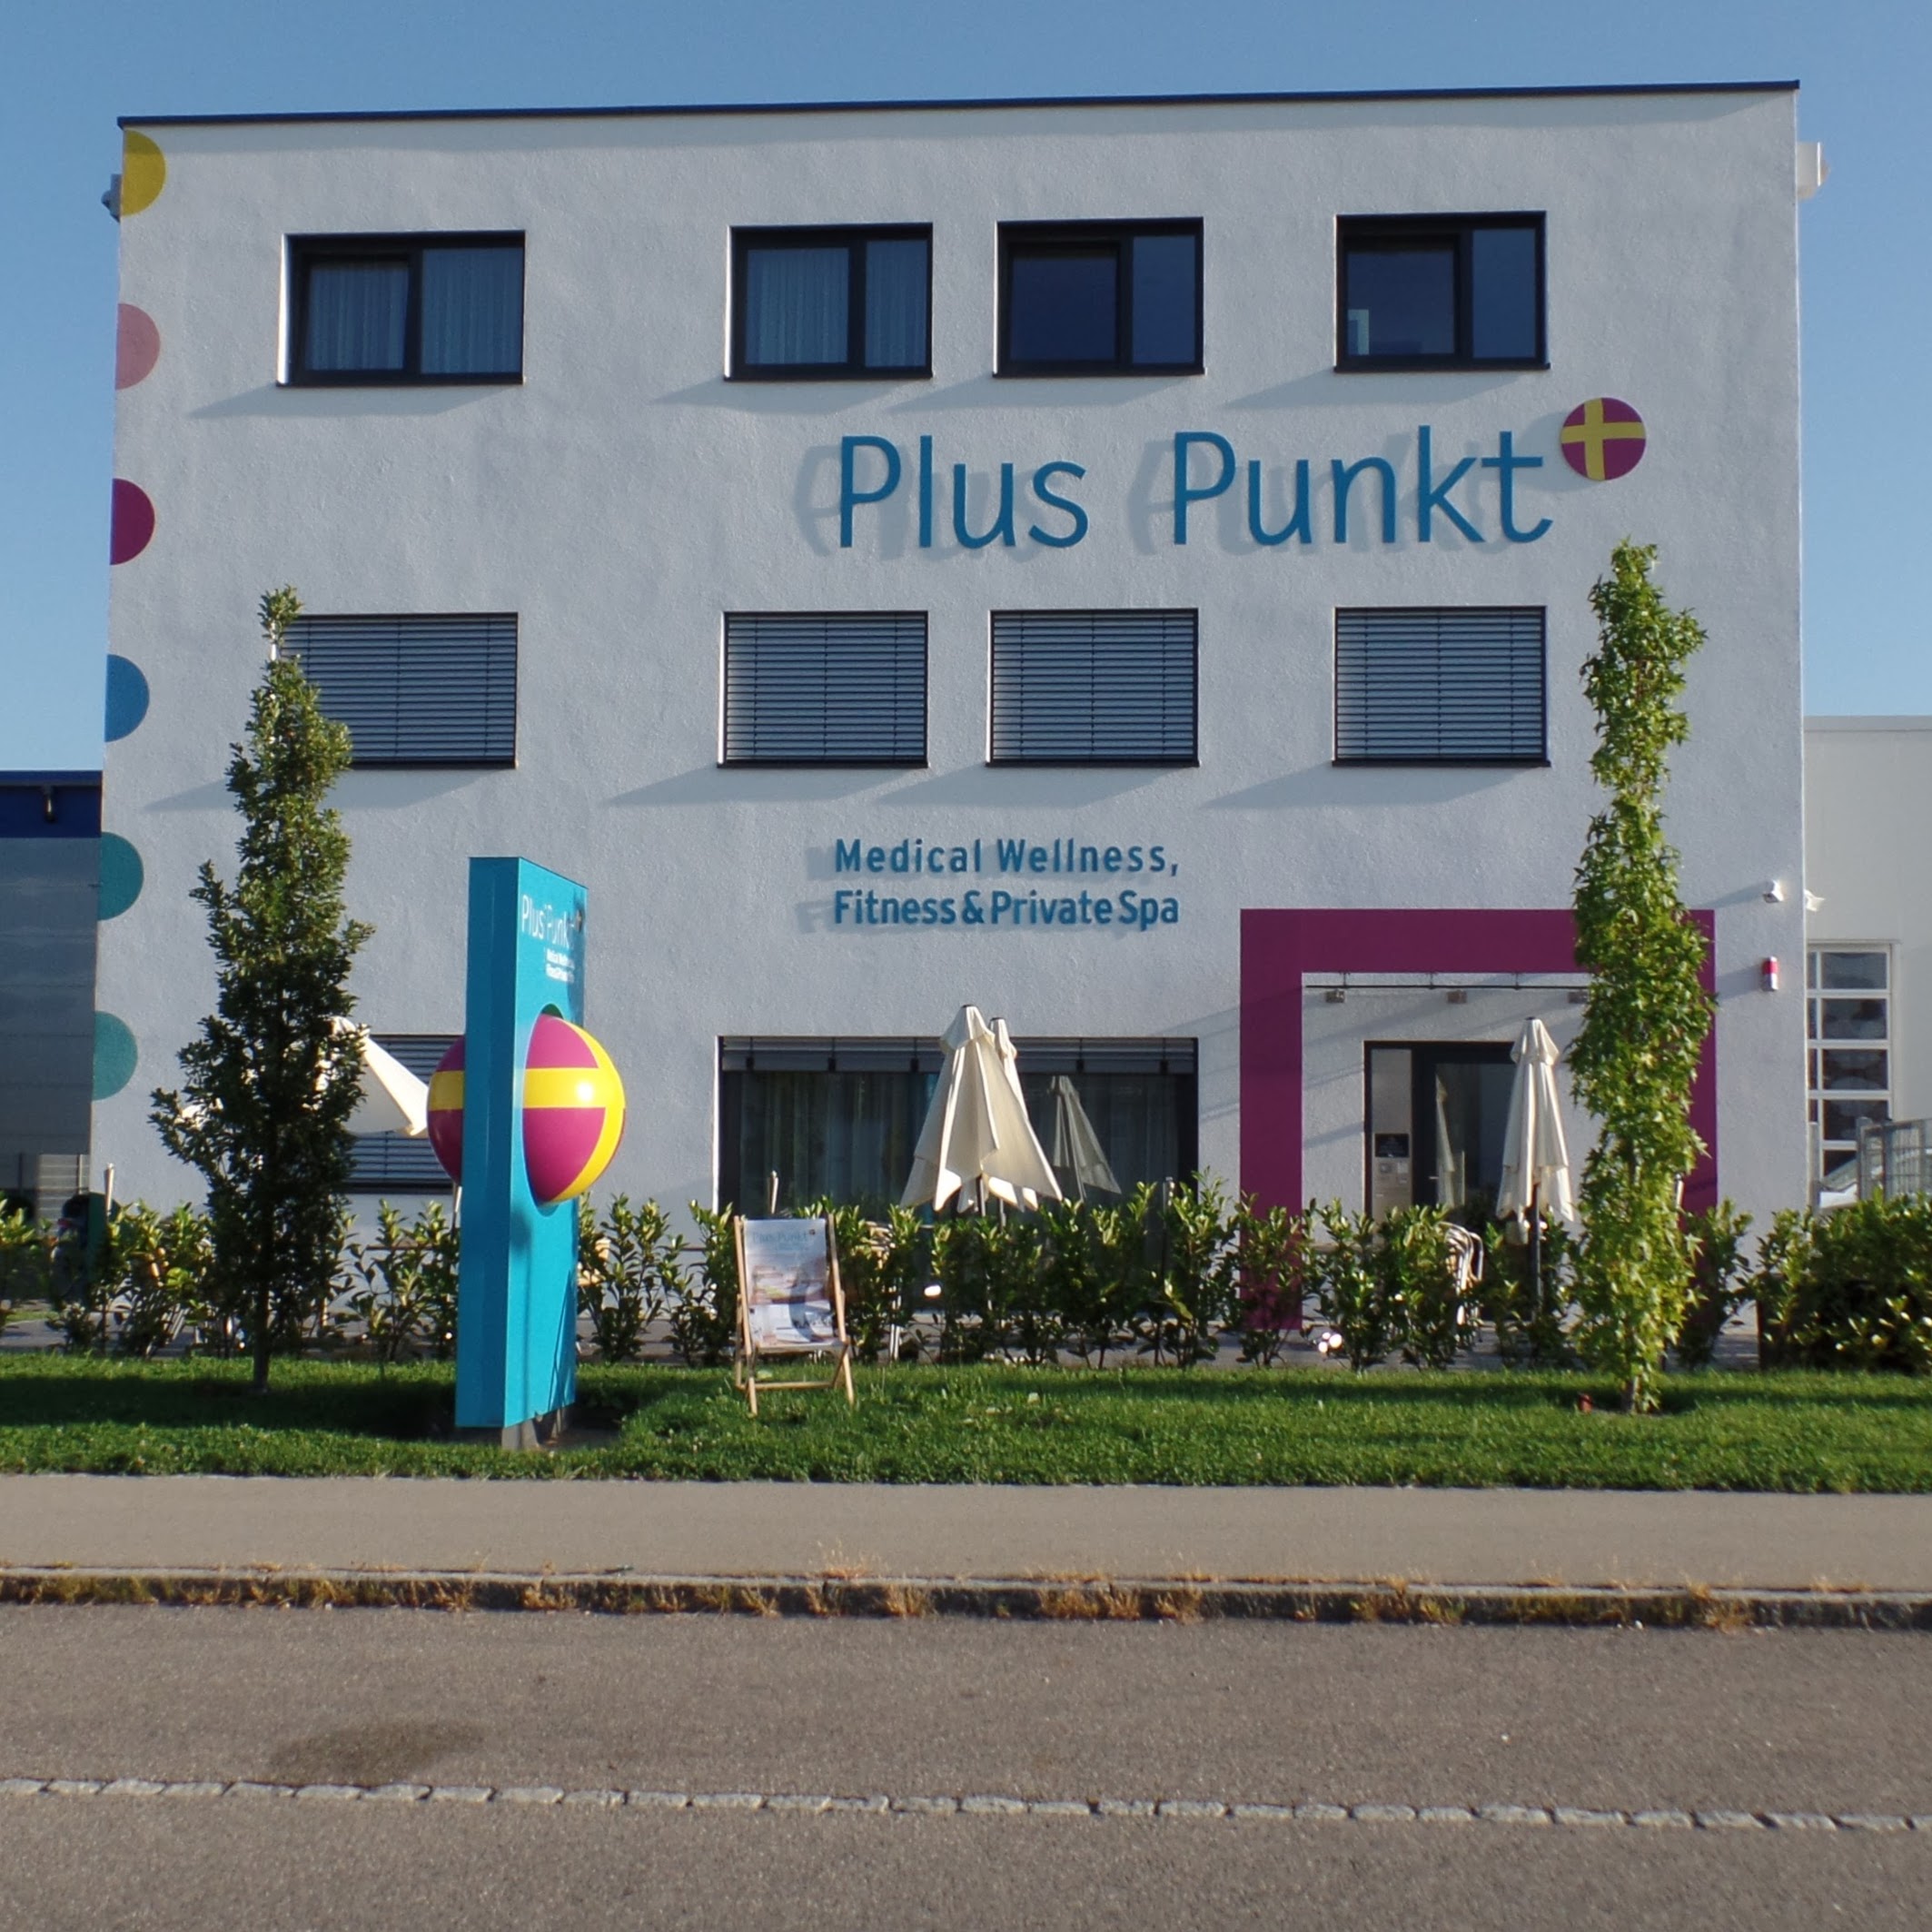 Plus Punkt Medical Wellness, Fitness & Private Spa